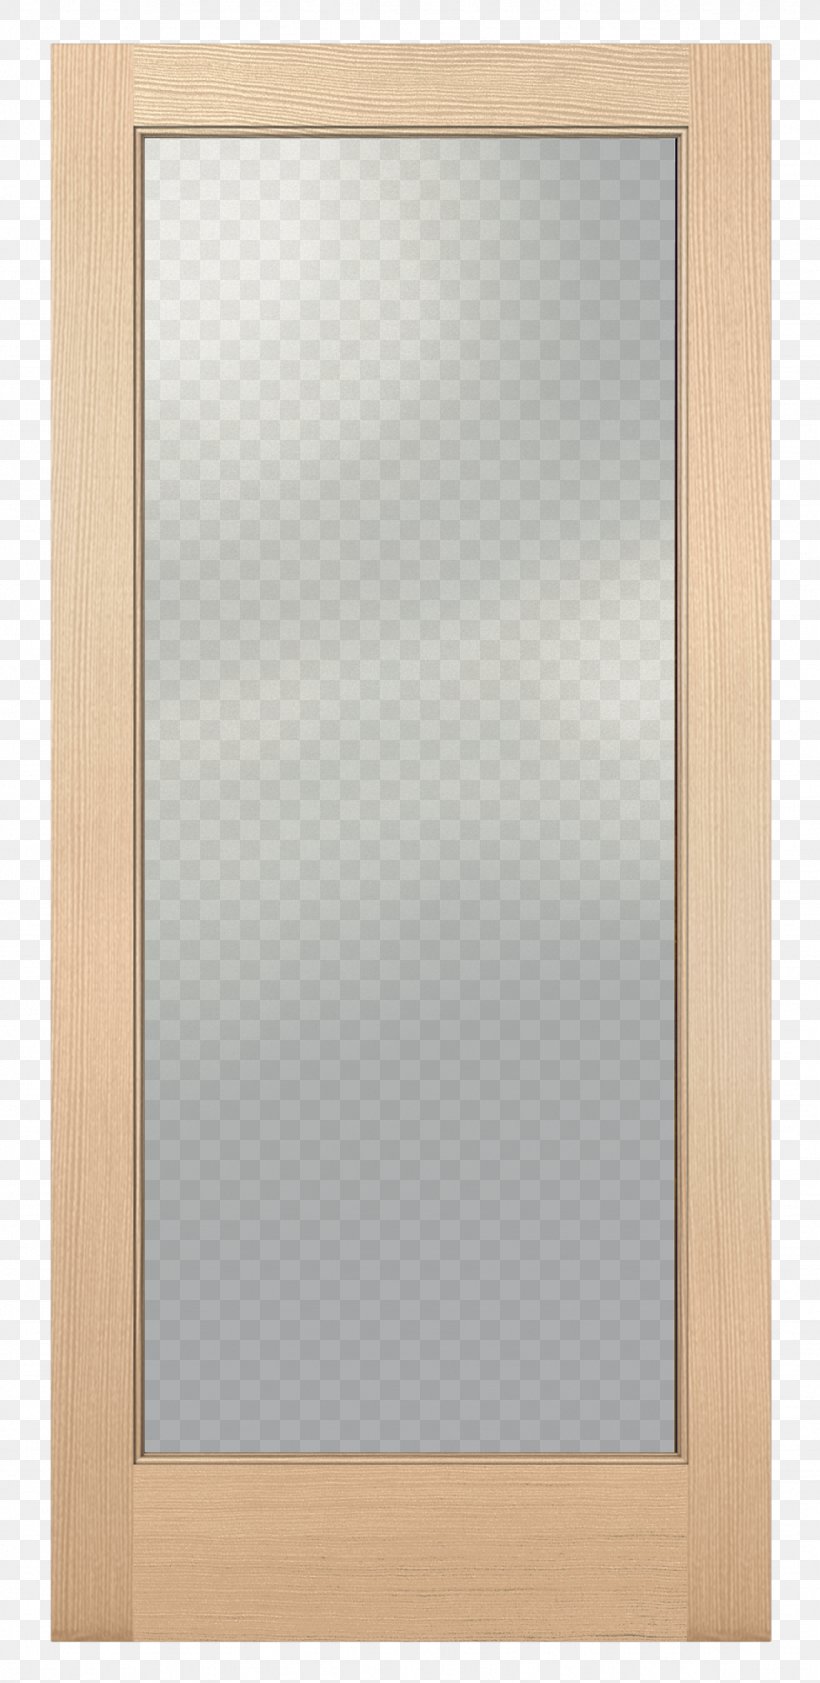 Picture Frames Rectangle Door, PNG, 974x2000px, Picture Frames, Door, Mirror, Picture Frame, Rectangle Download Free